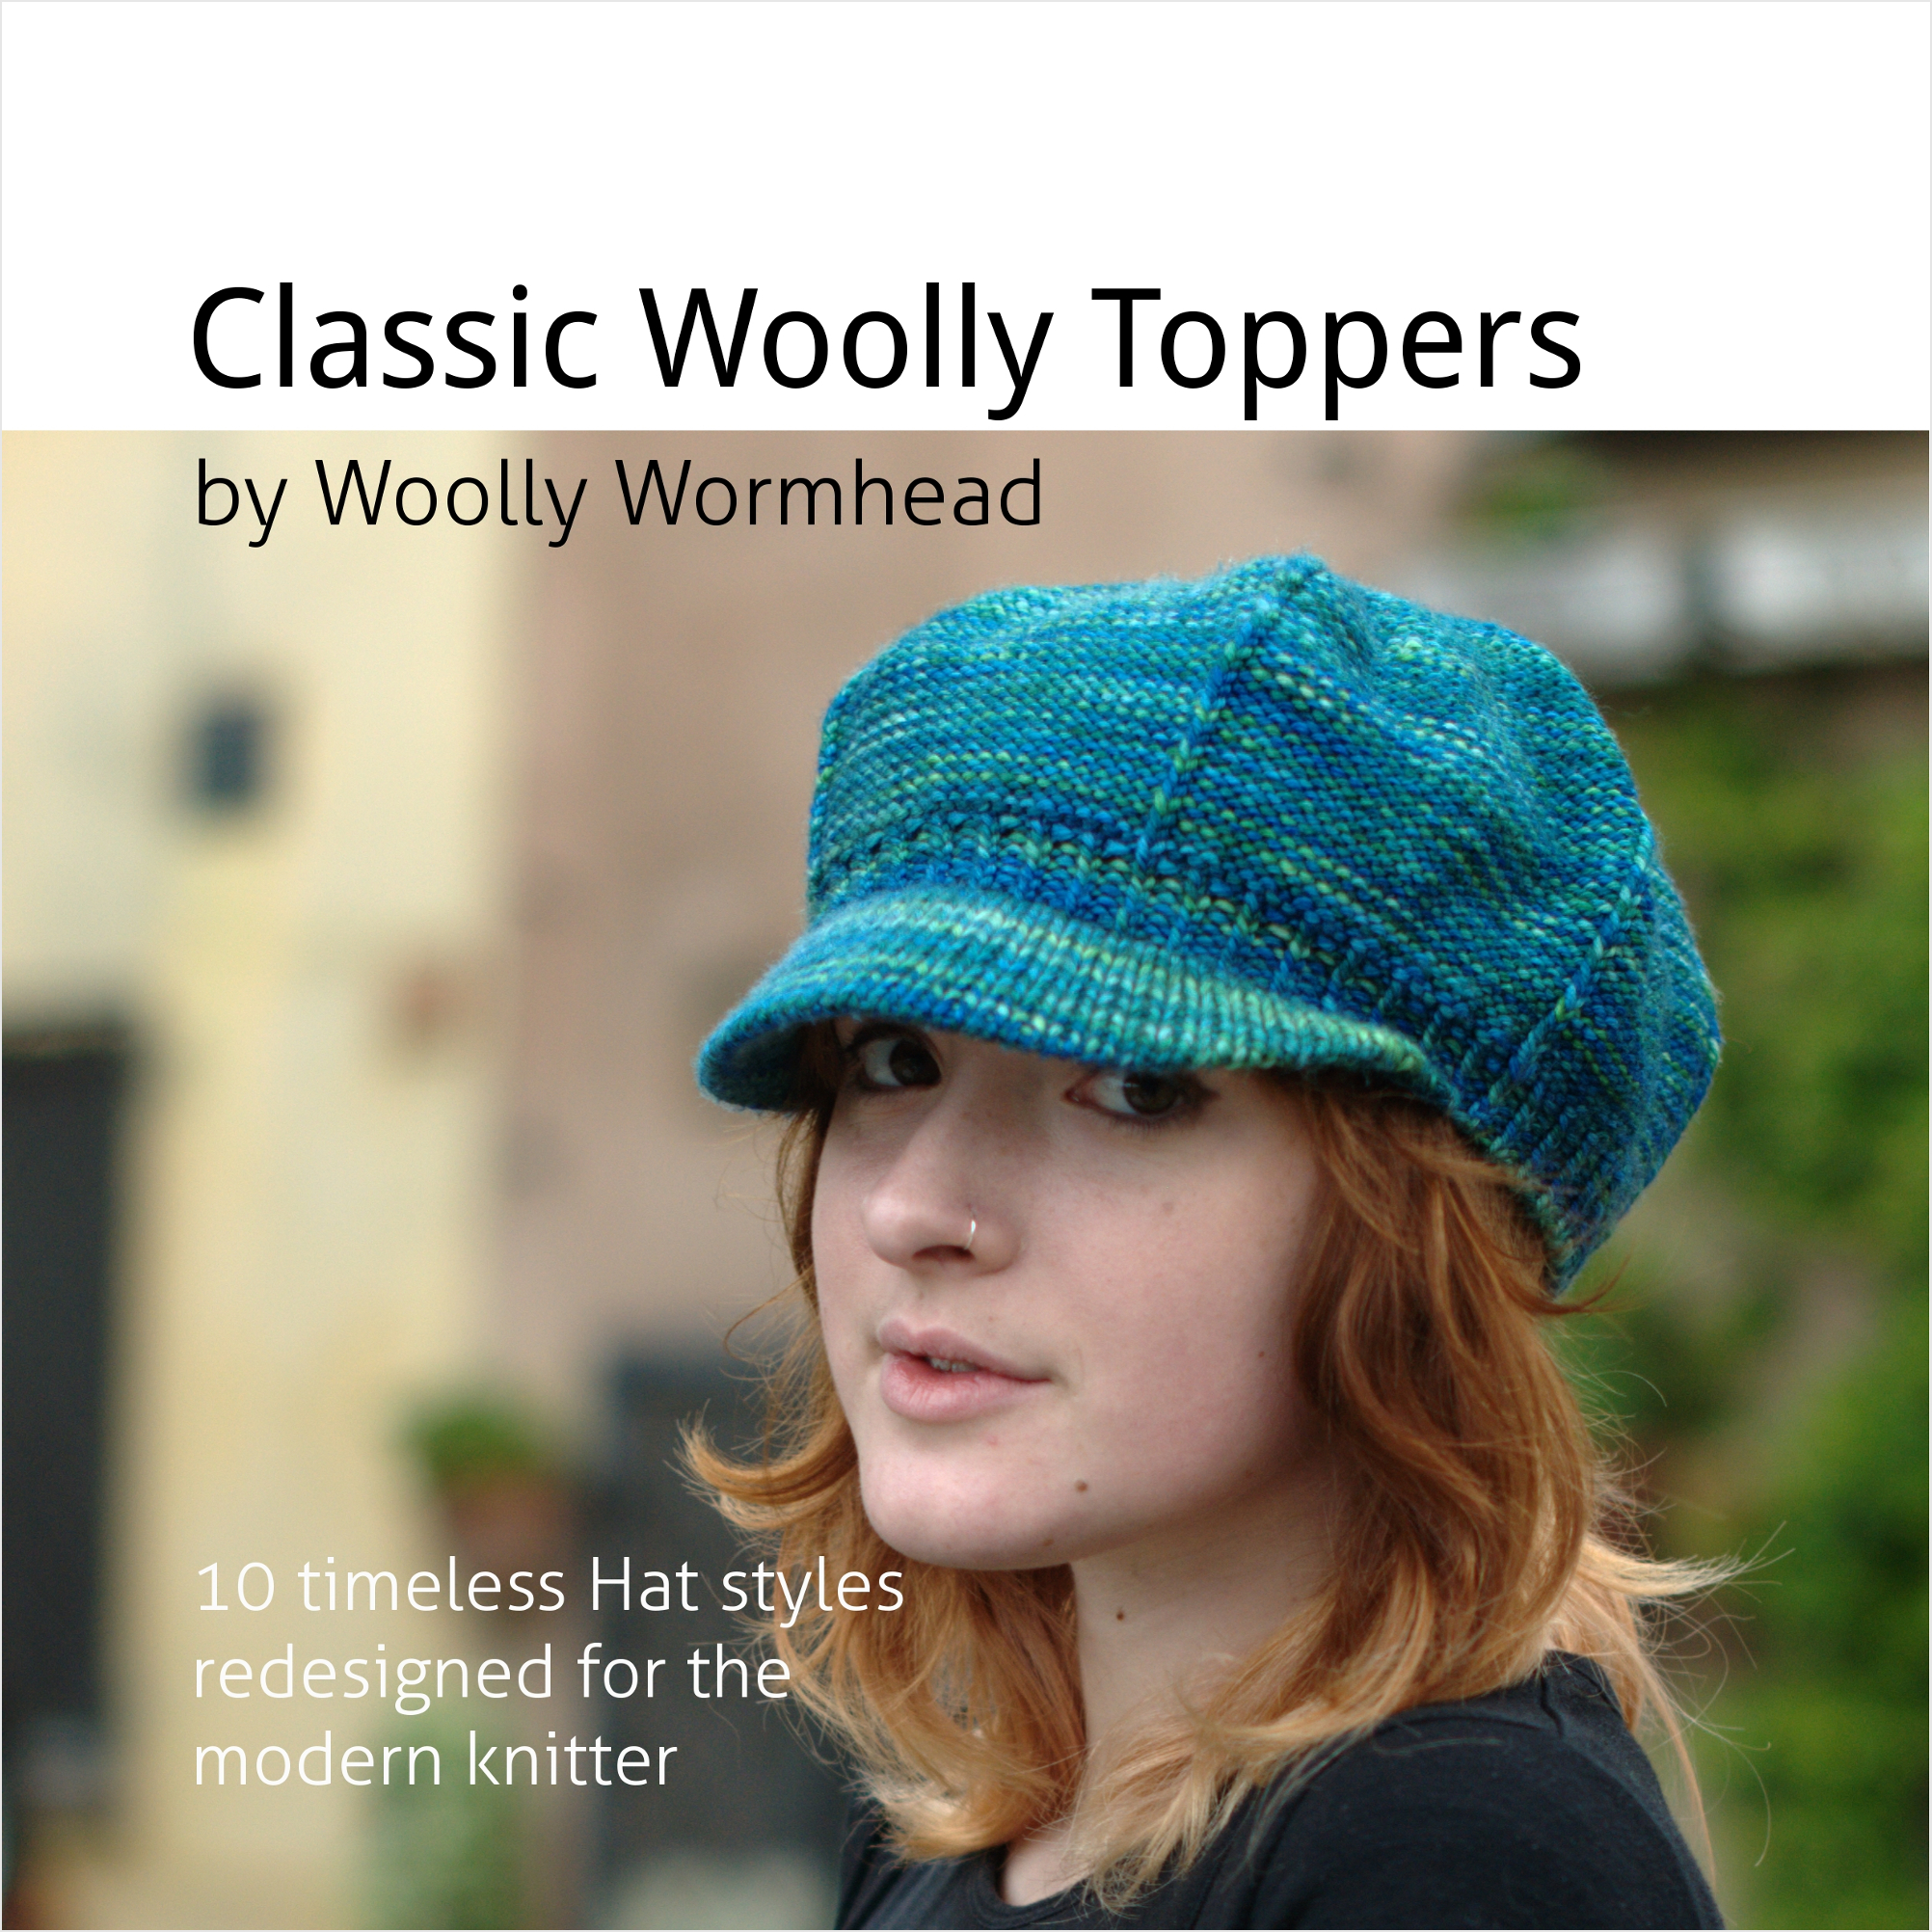 Classic Woolly Toppers - 10 timeless Hats redesigned for the modern knitter